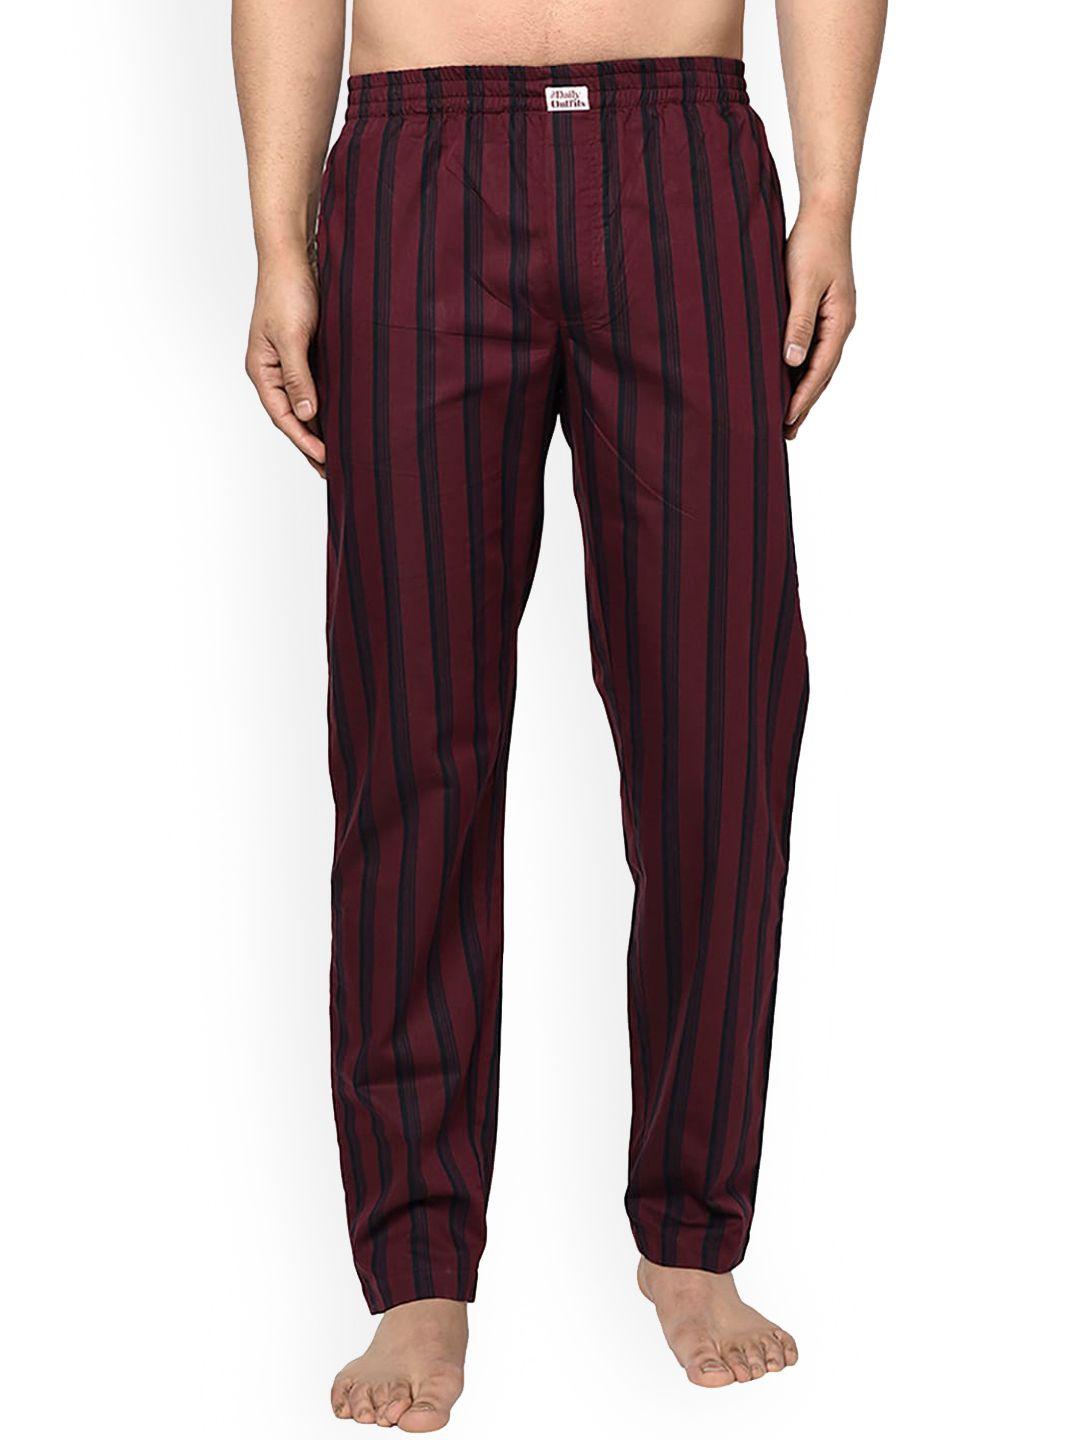 the daily outfits men maroon striped lounge pants